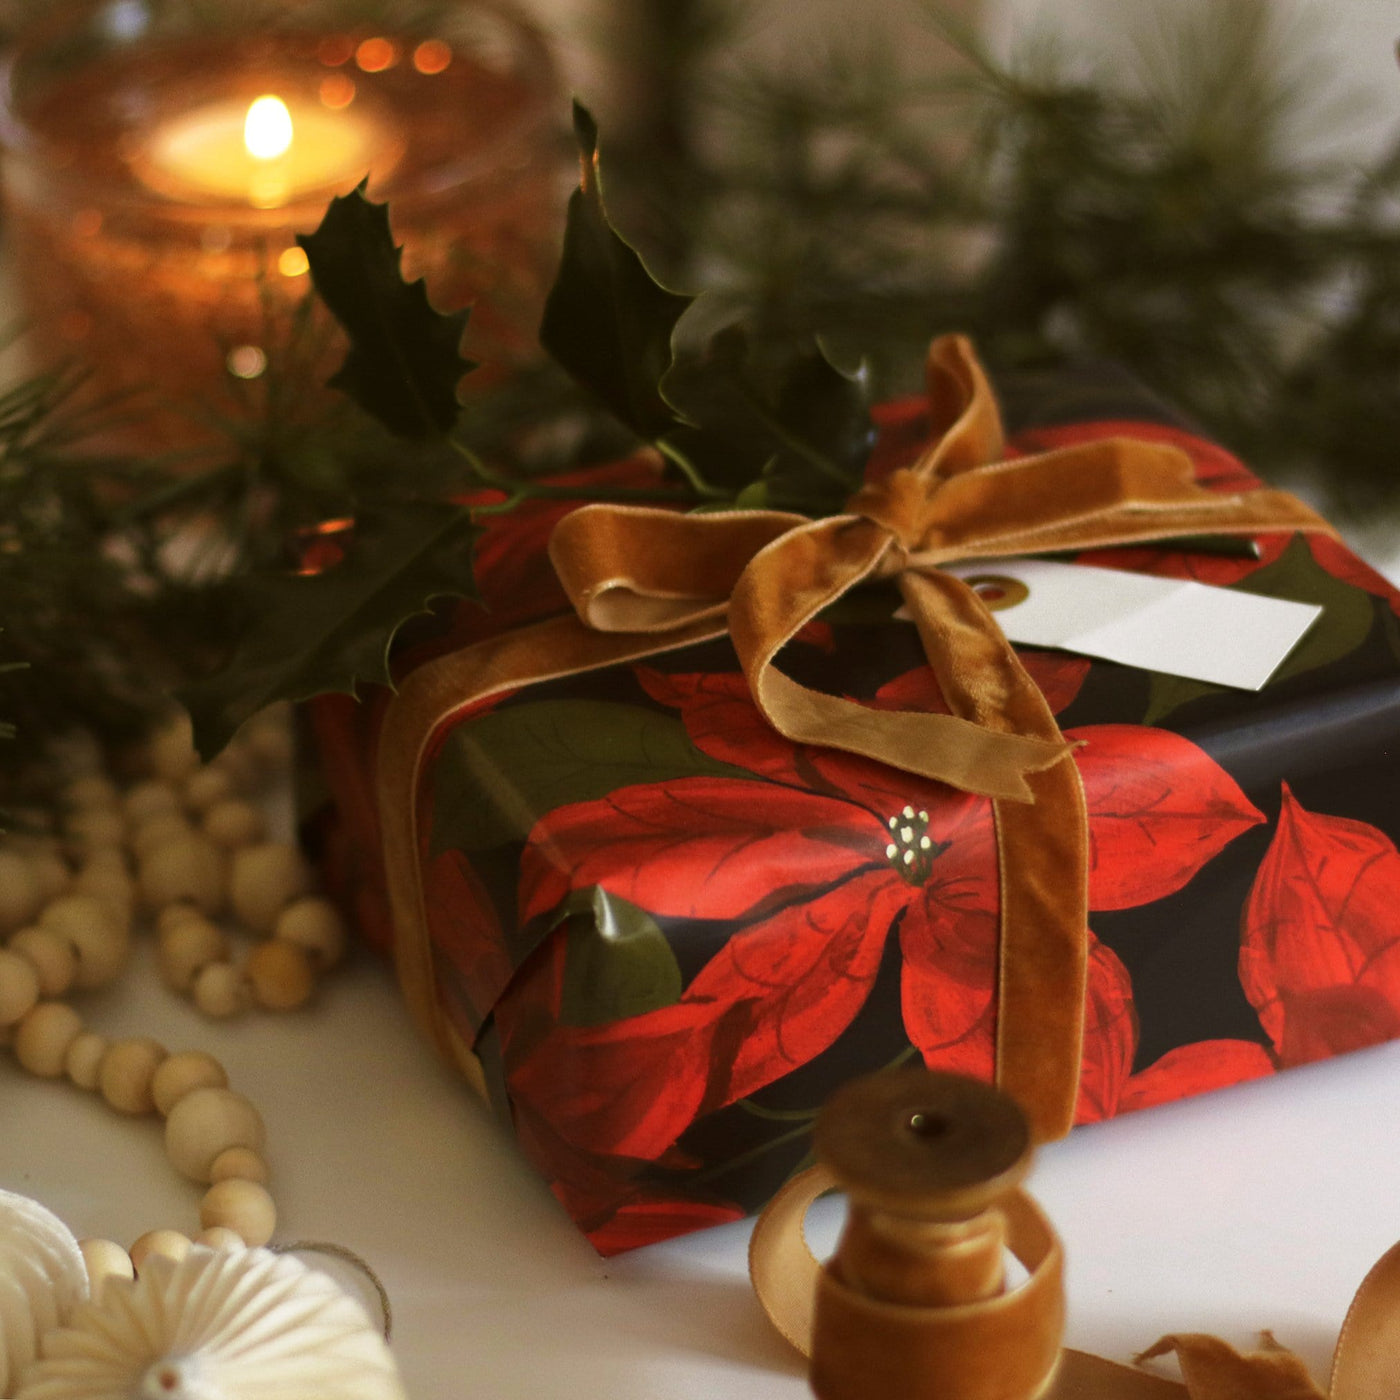 Gift Wrapped In Red Poinsettias Christmas Wrapping Paper With An Orange Velvet Ribbon Bow - Annie Dornan Smith